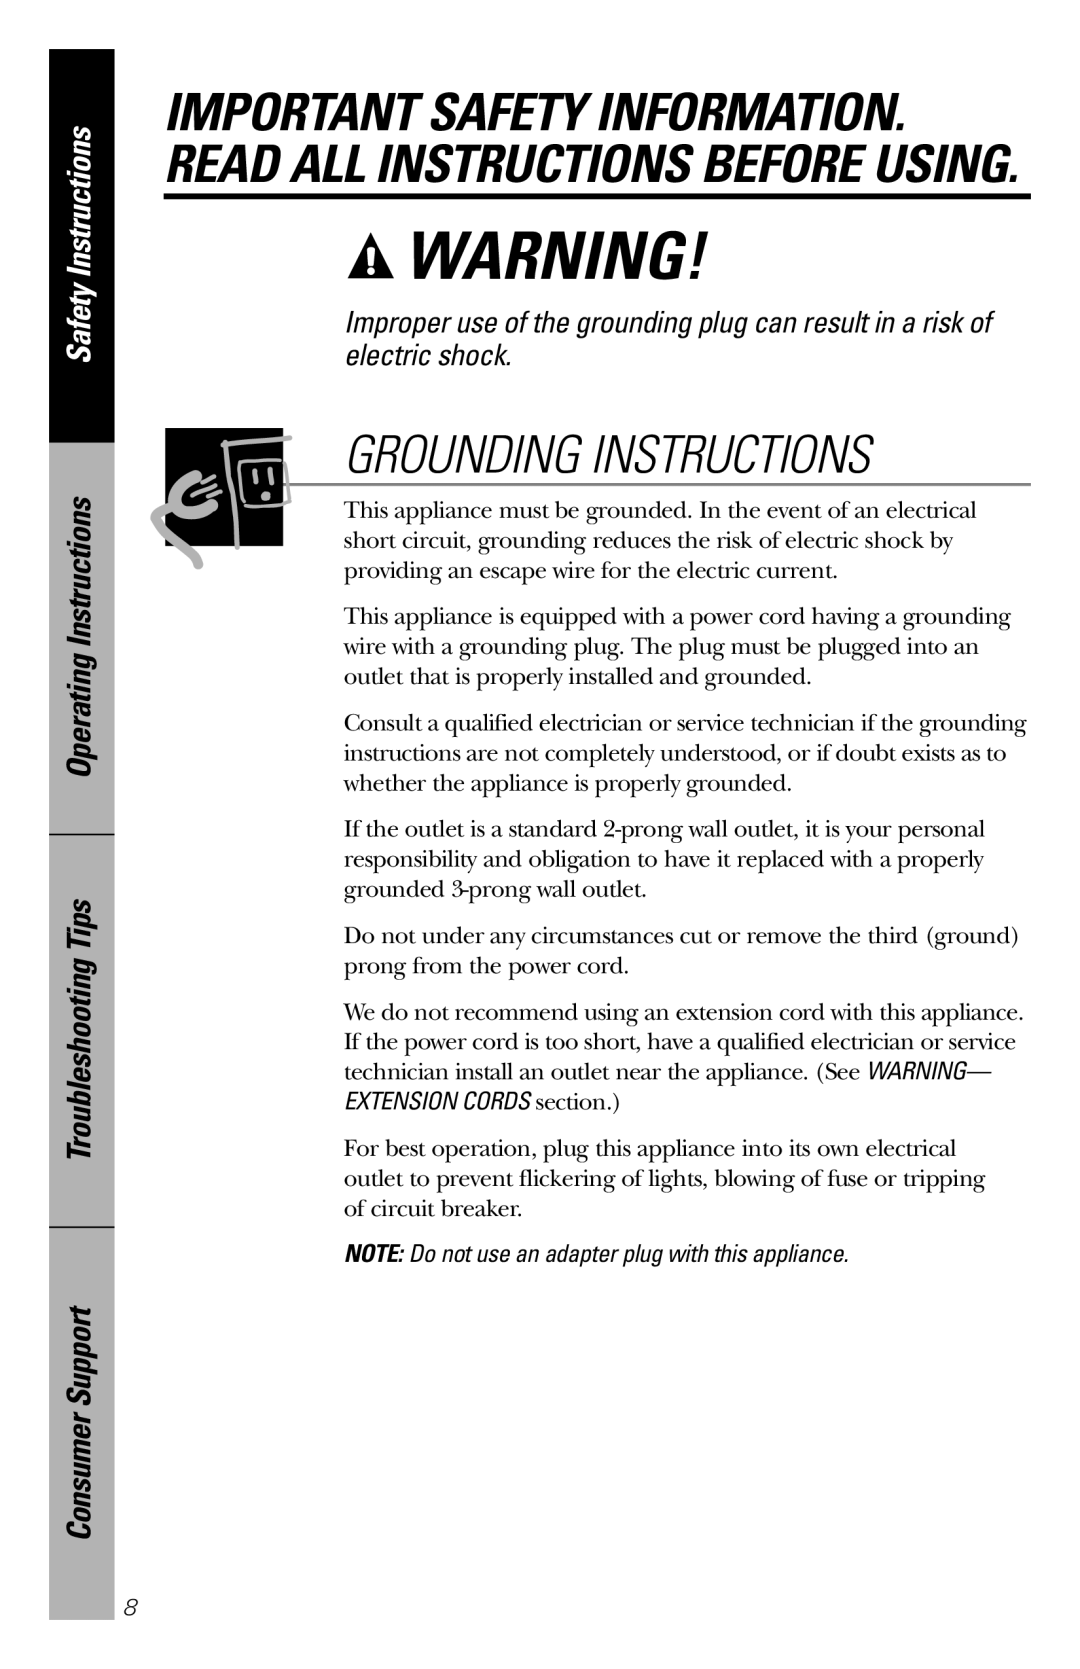 GE PEM31 Grounding Instructions, Safety Instructions, Operating Instructions Troubleshooting Tips, Consumer Support 